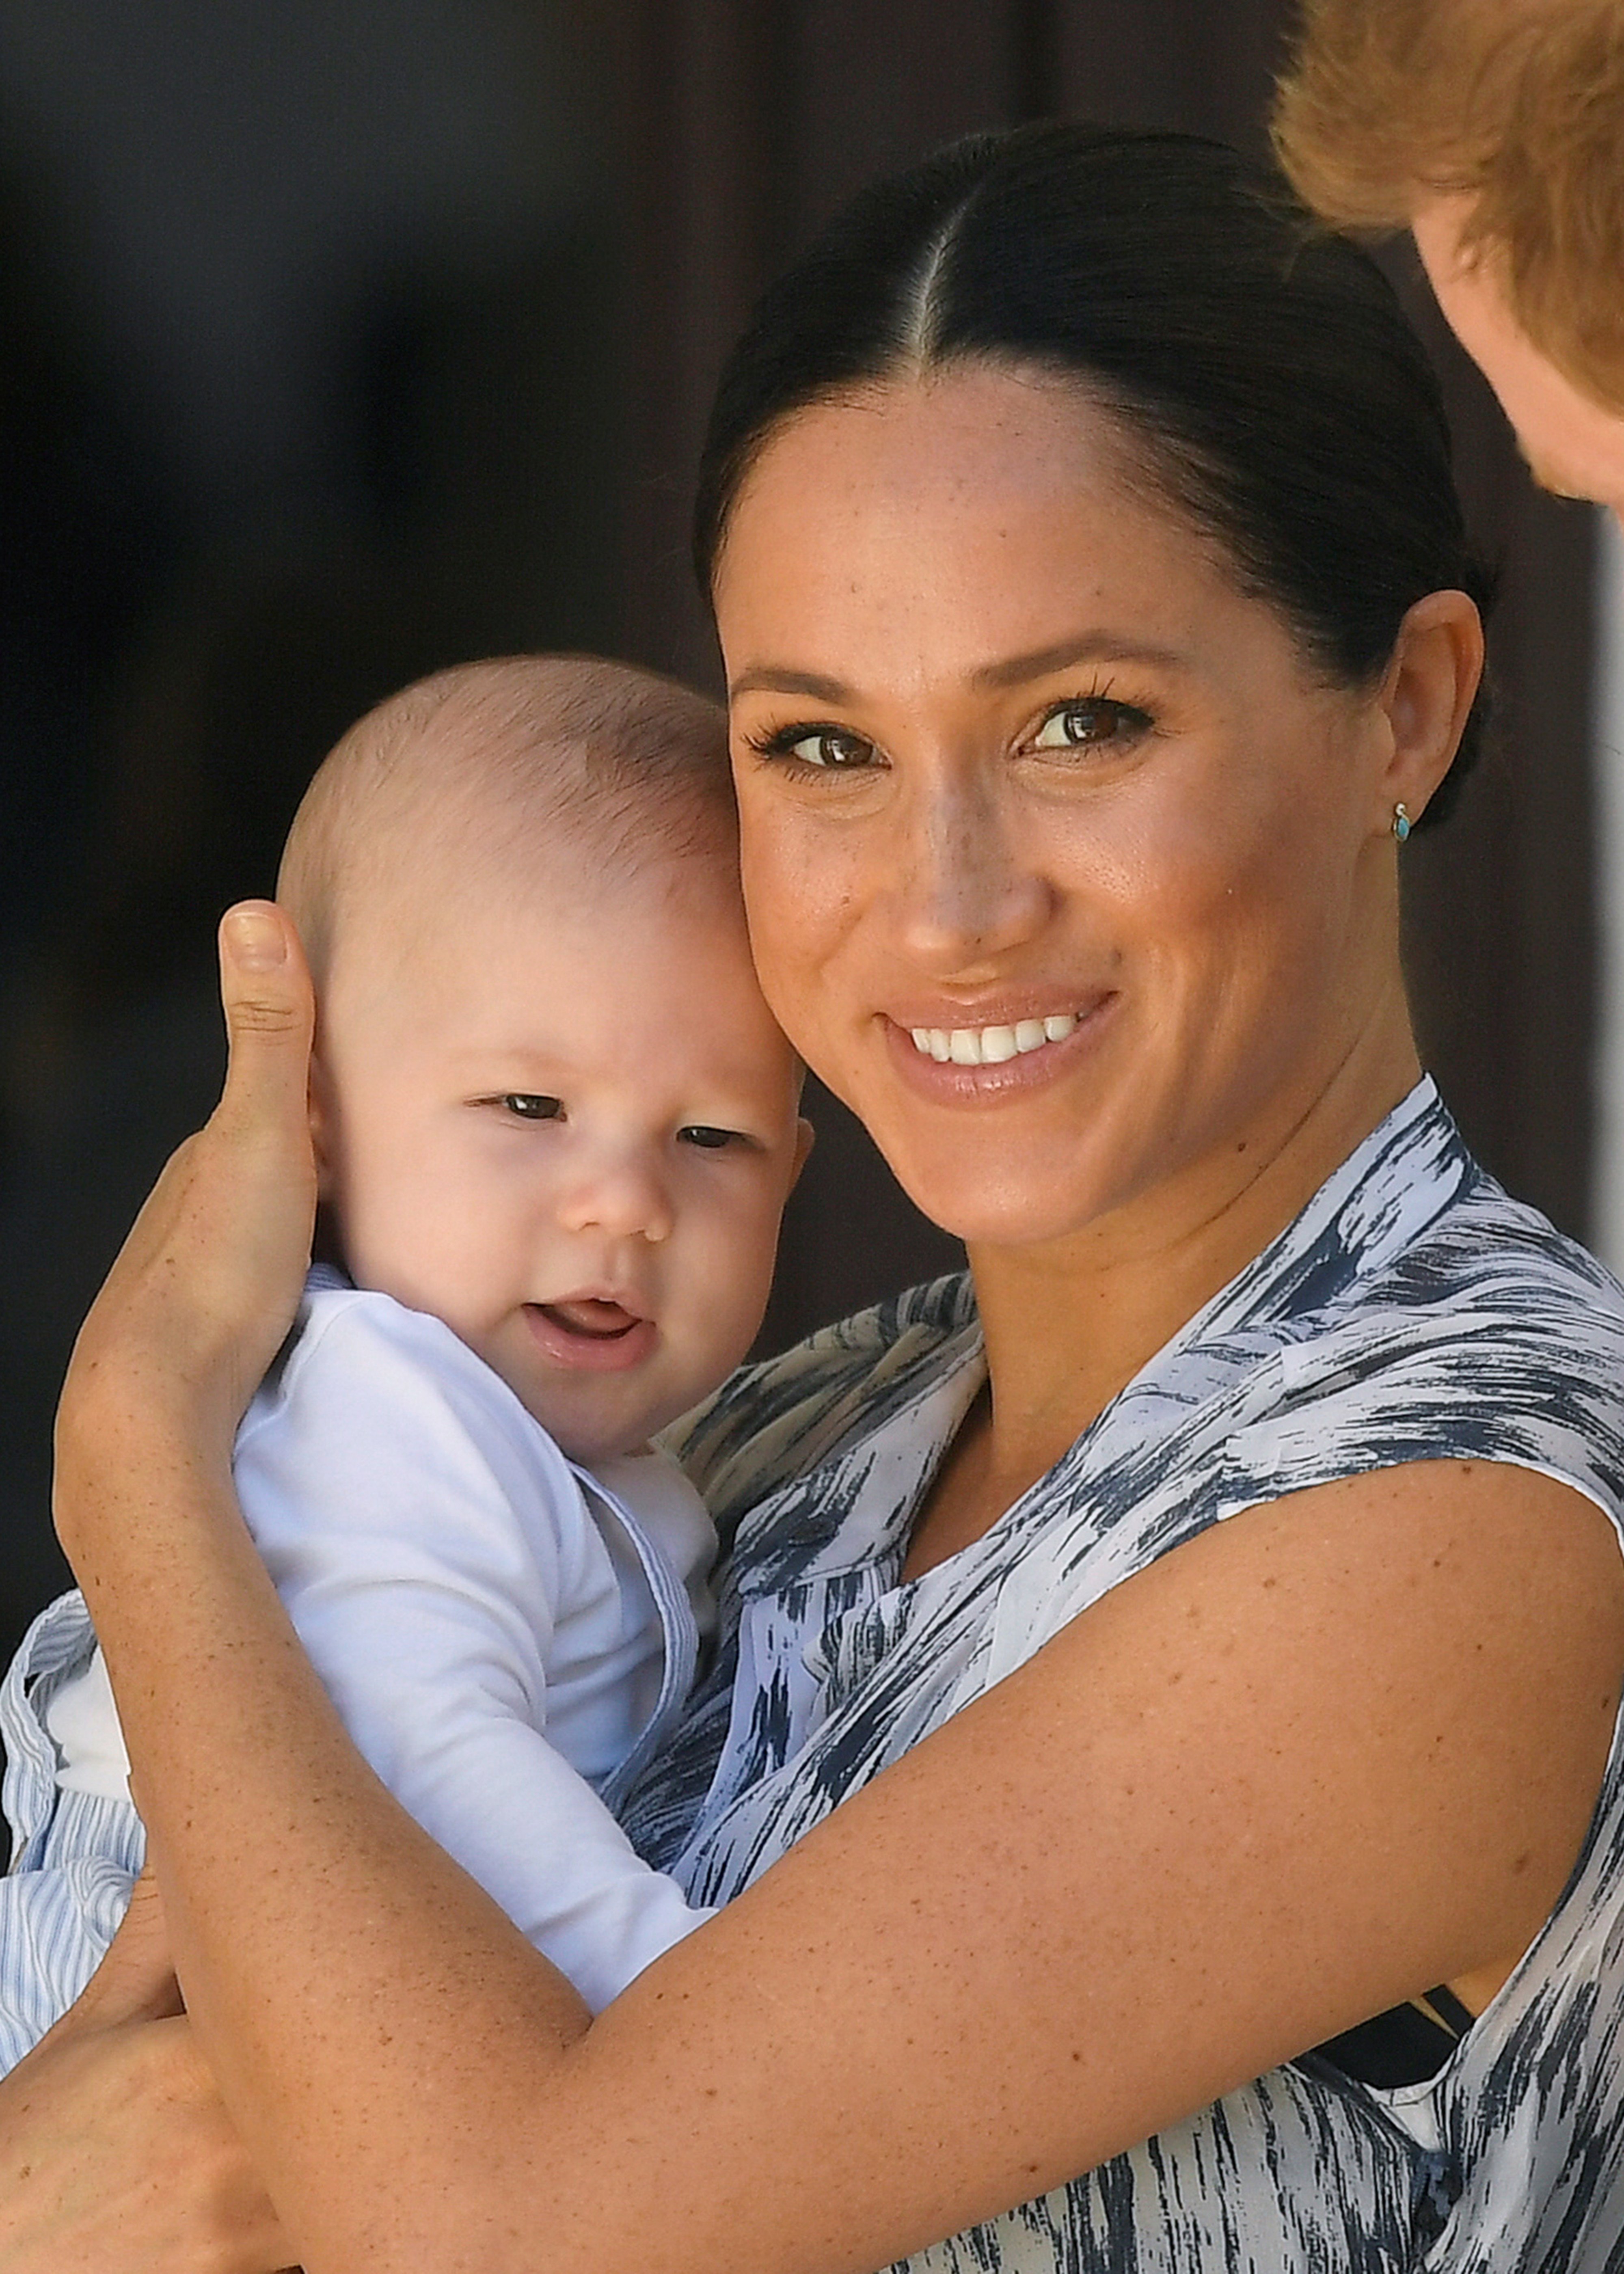 Meghan Markle and baby Archie Mountbatten-Windsor during a tour in Cape Town, South Africa on September 25, 2019. | Source: Getty Images